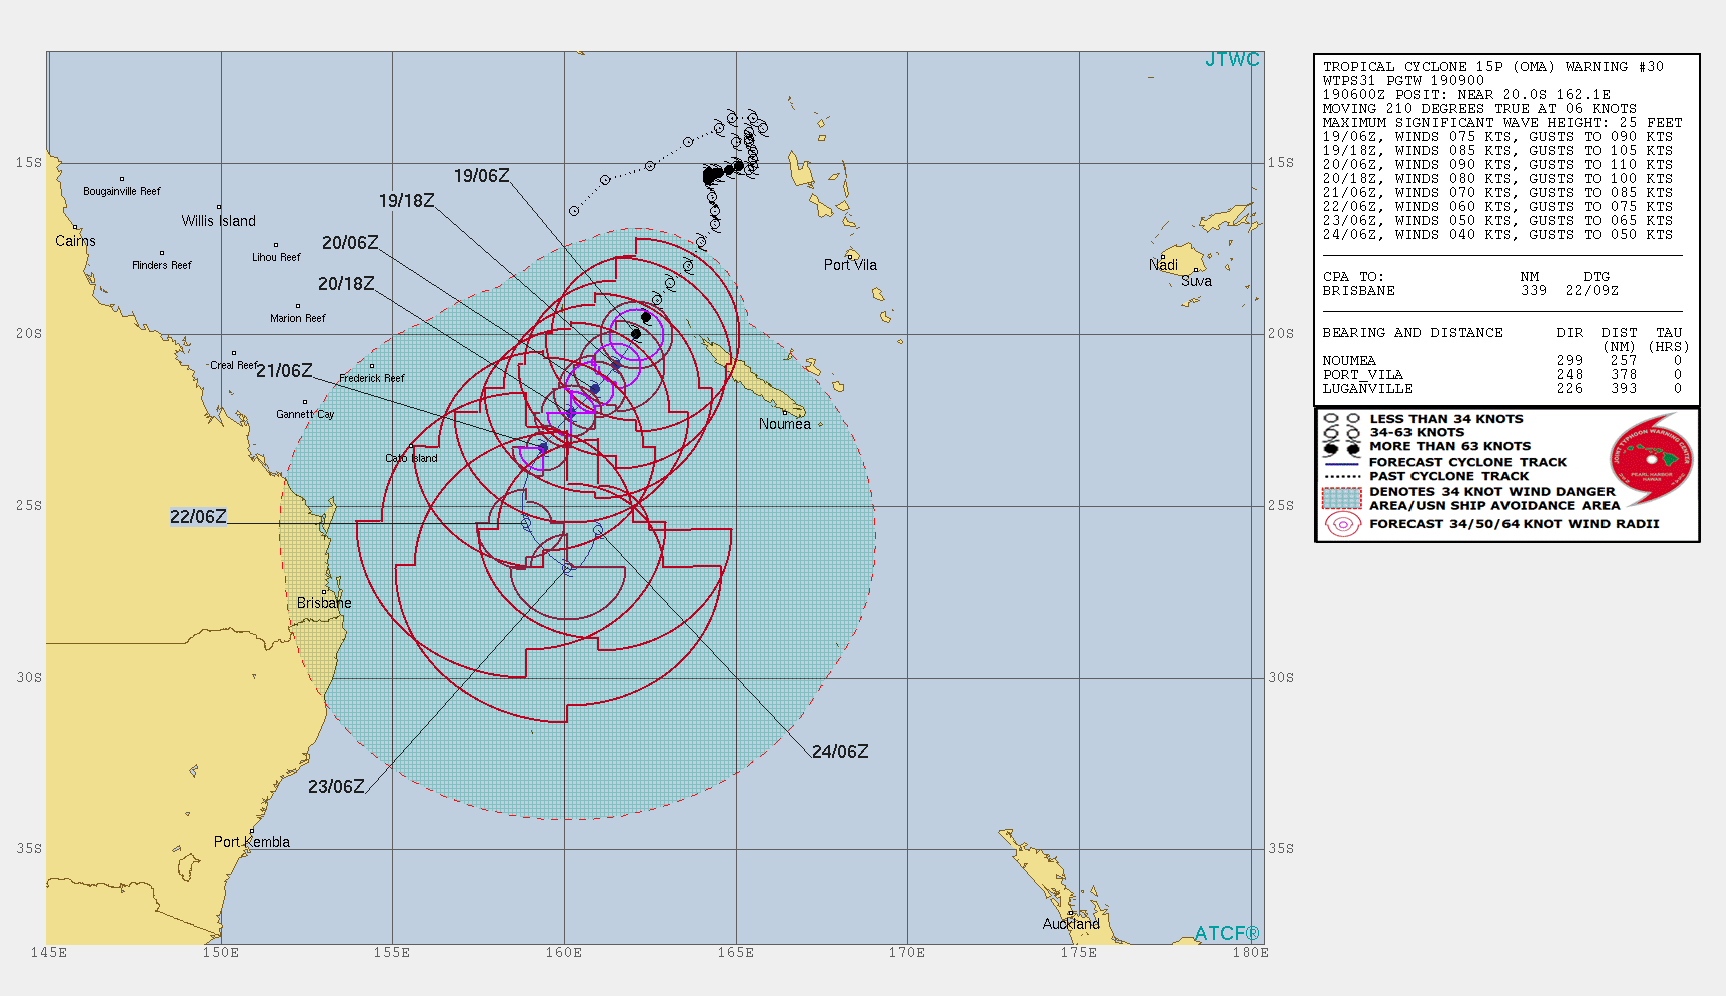 Cyclone OMA(15P) expected to peak as a CAT2 US within the next 24hours